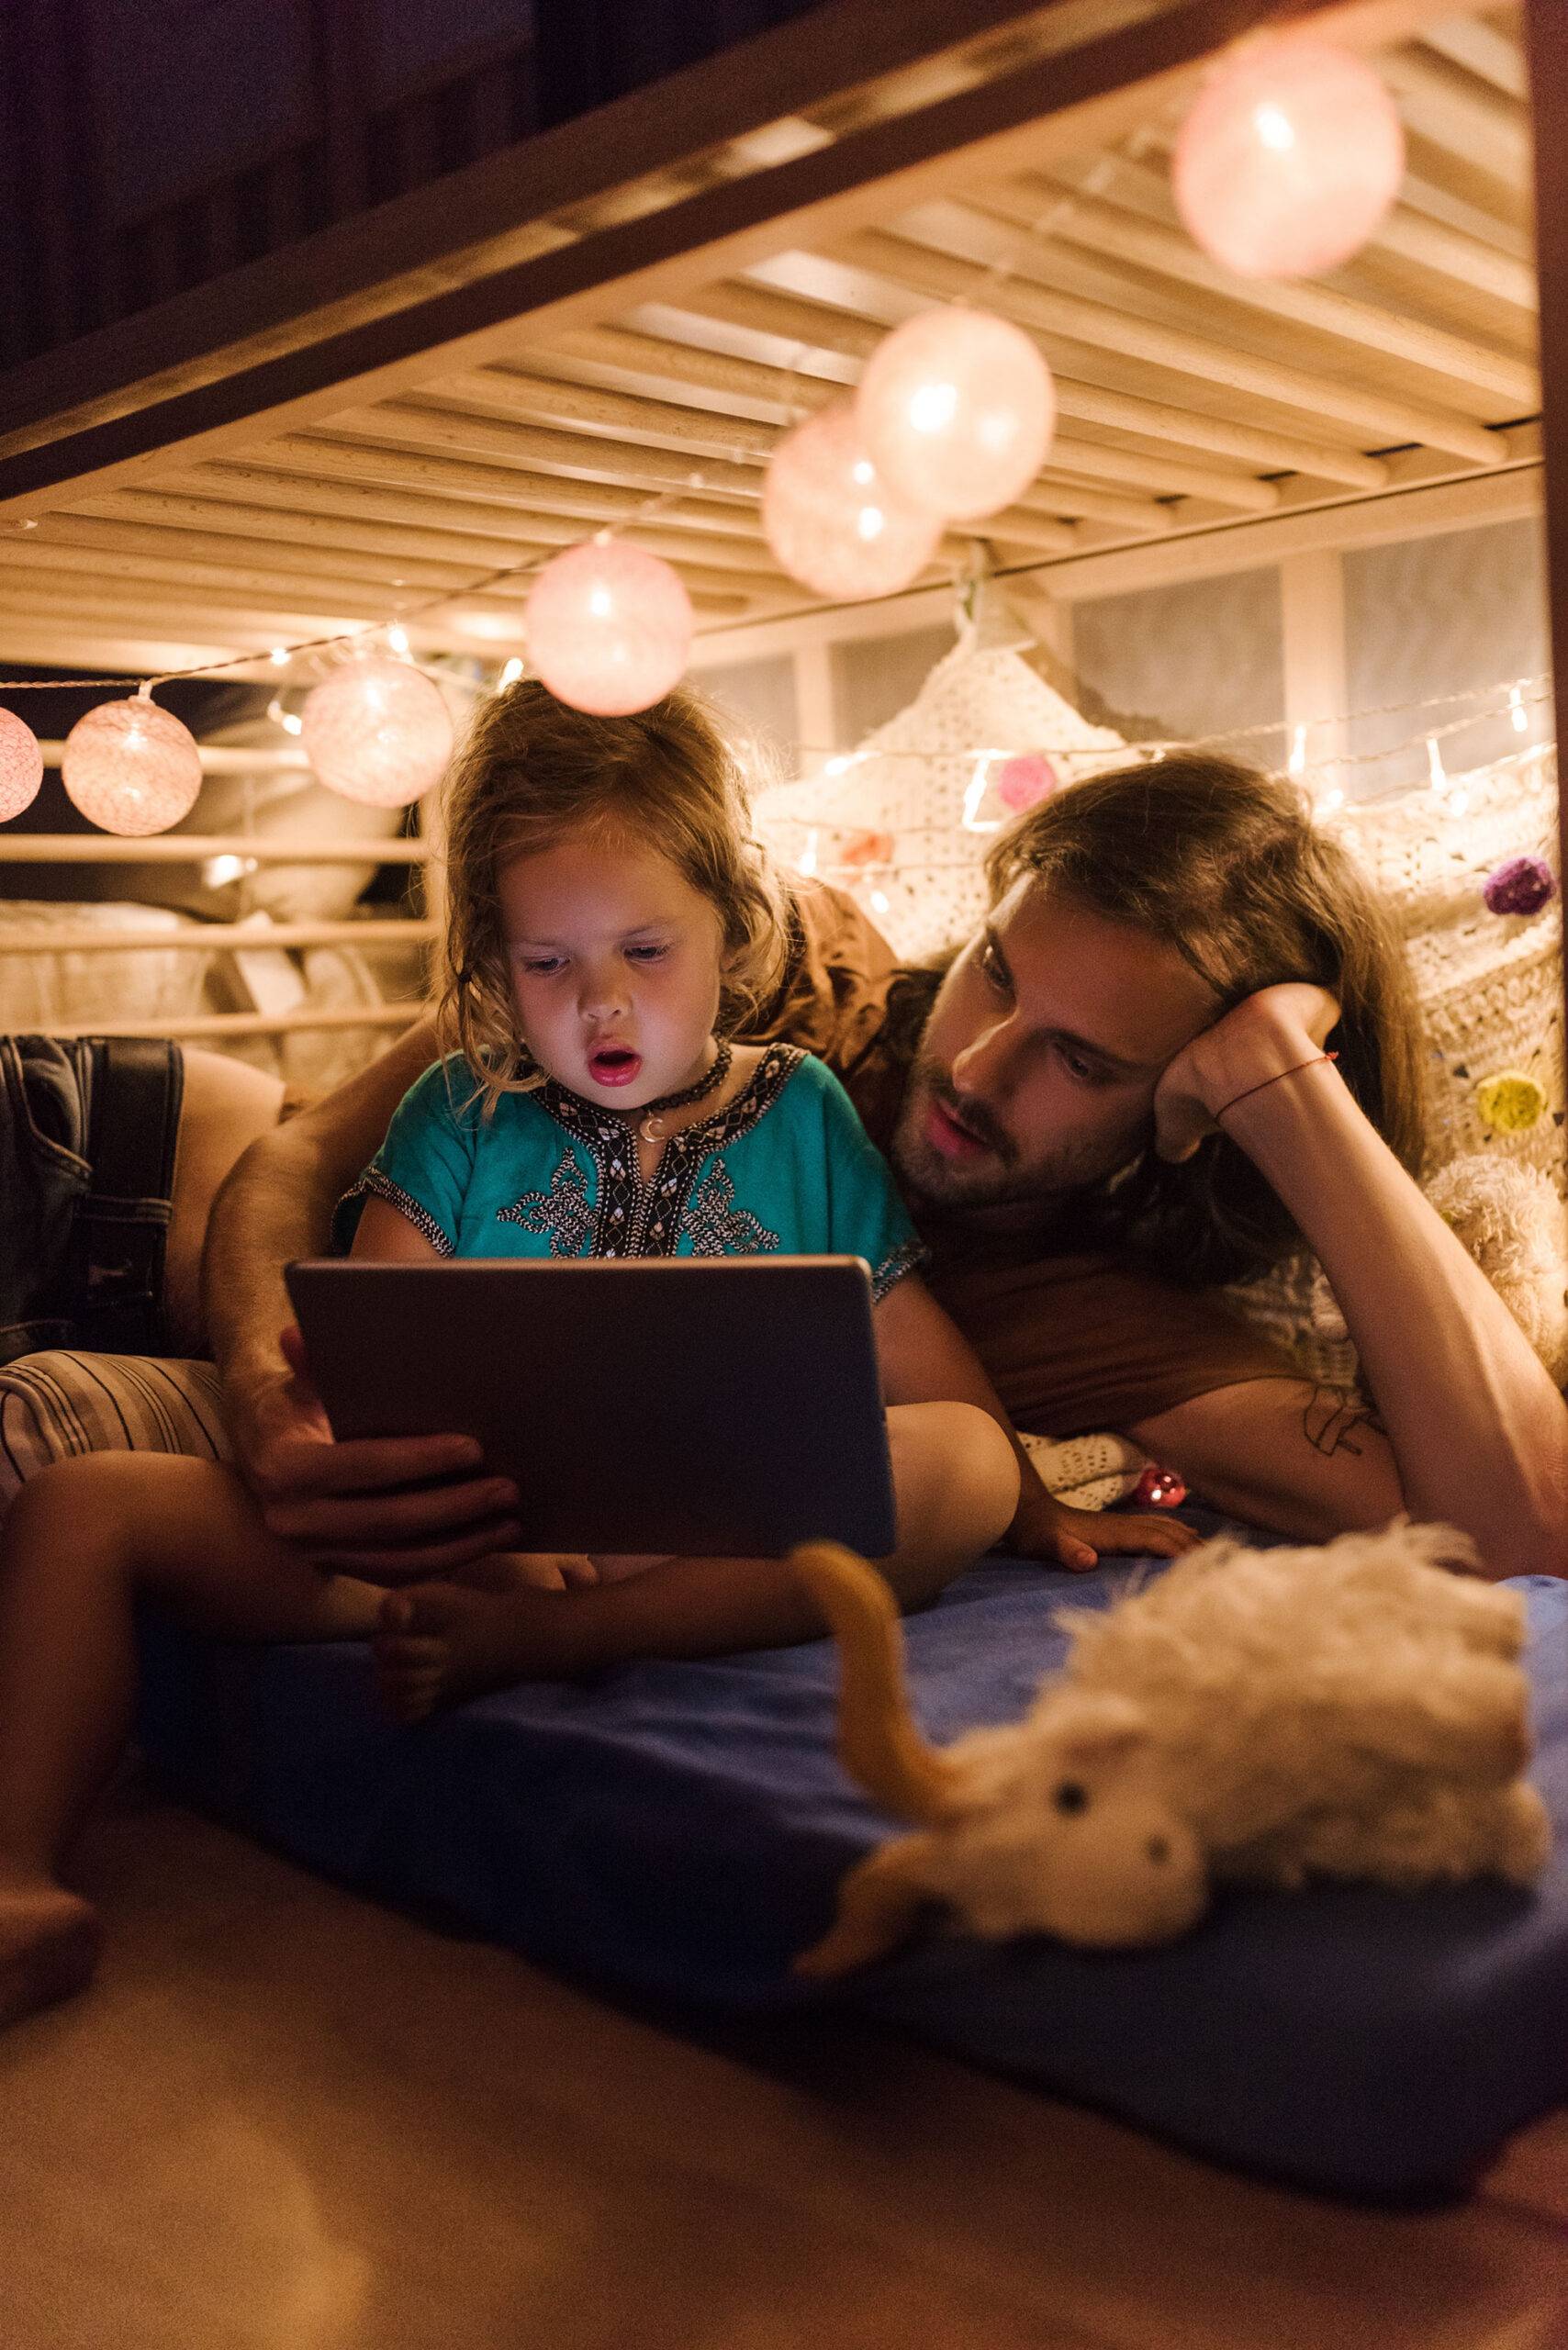 Little charming girl with bearded man cuddling on small cozy bed with garlands and watching cartoon on tablet together